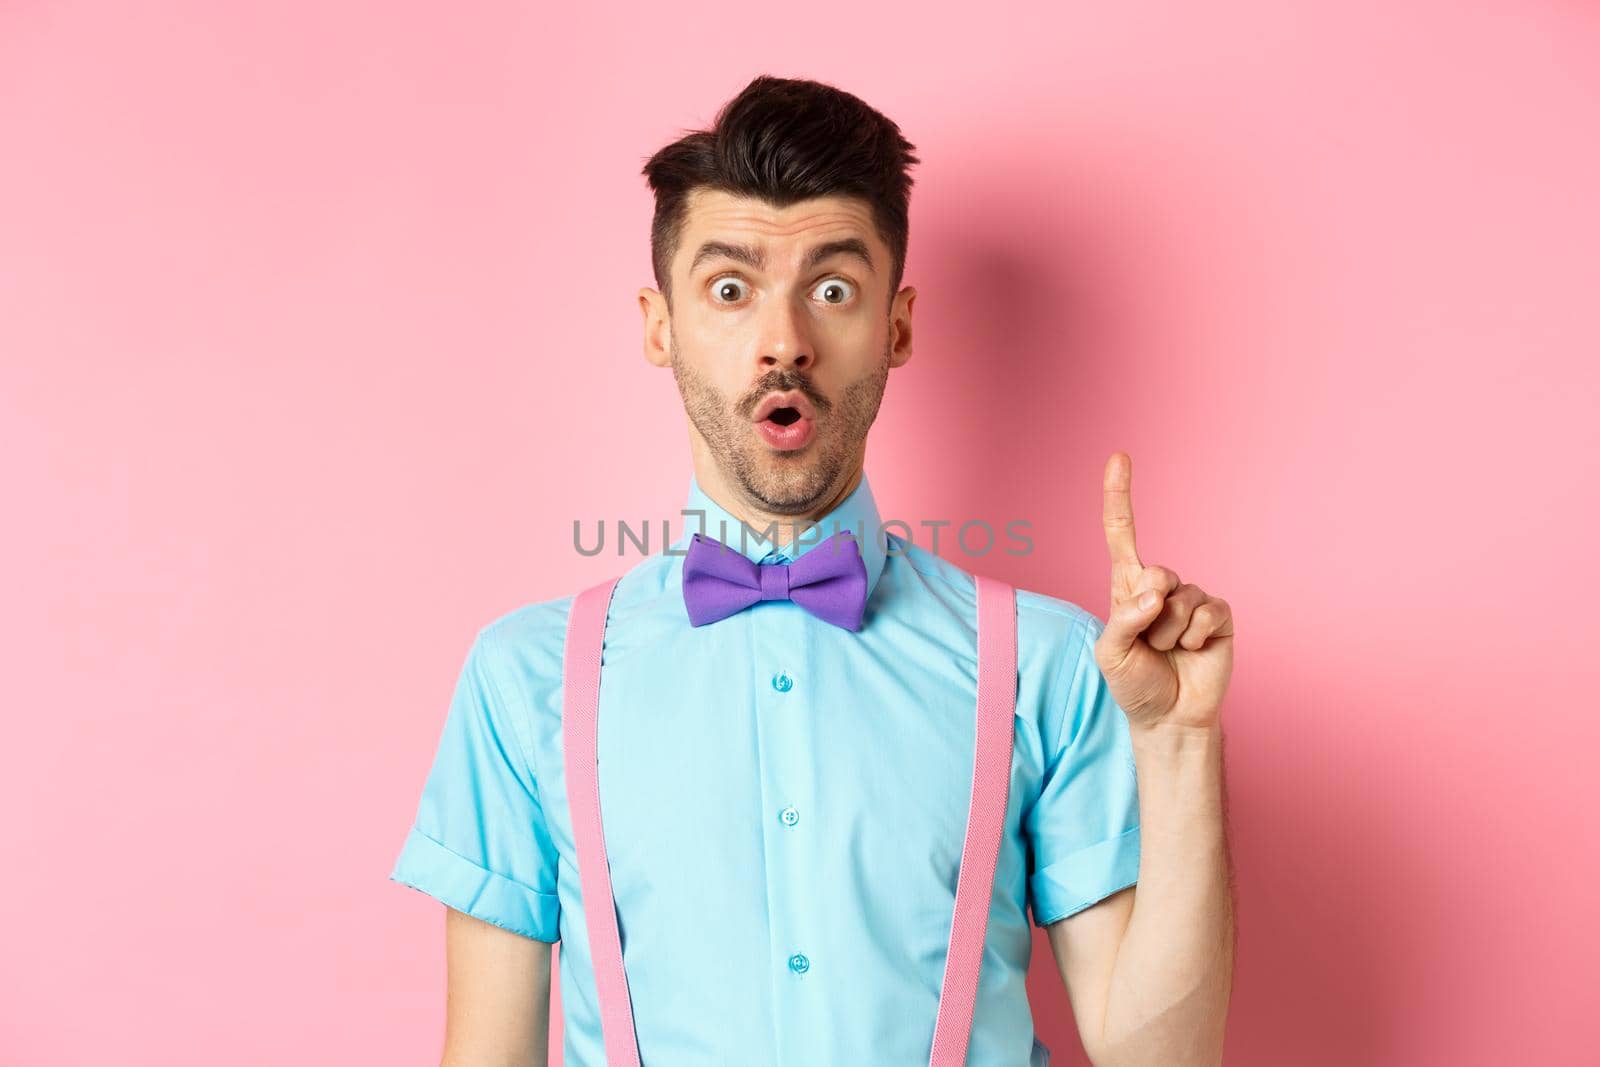 Creative man pitching an idea, saying suggestion with raised finger, standing on pink background.